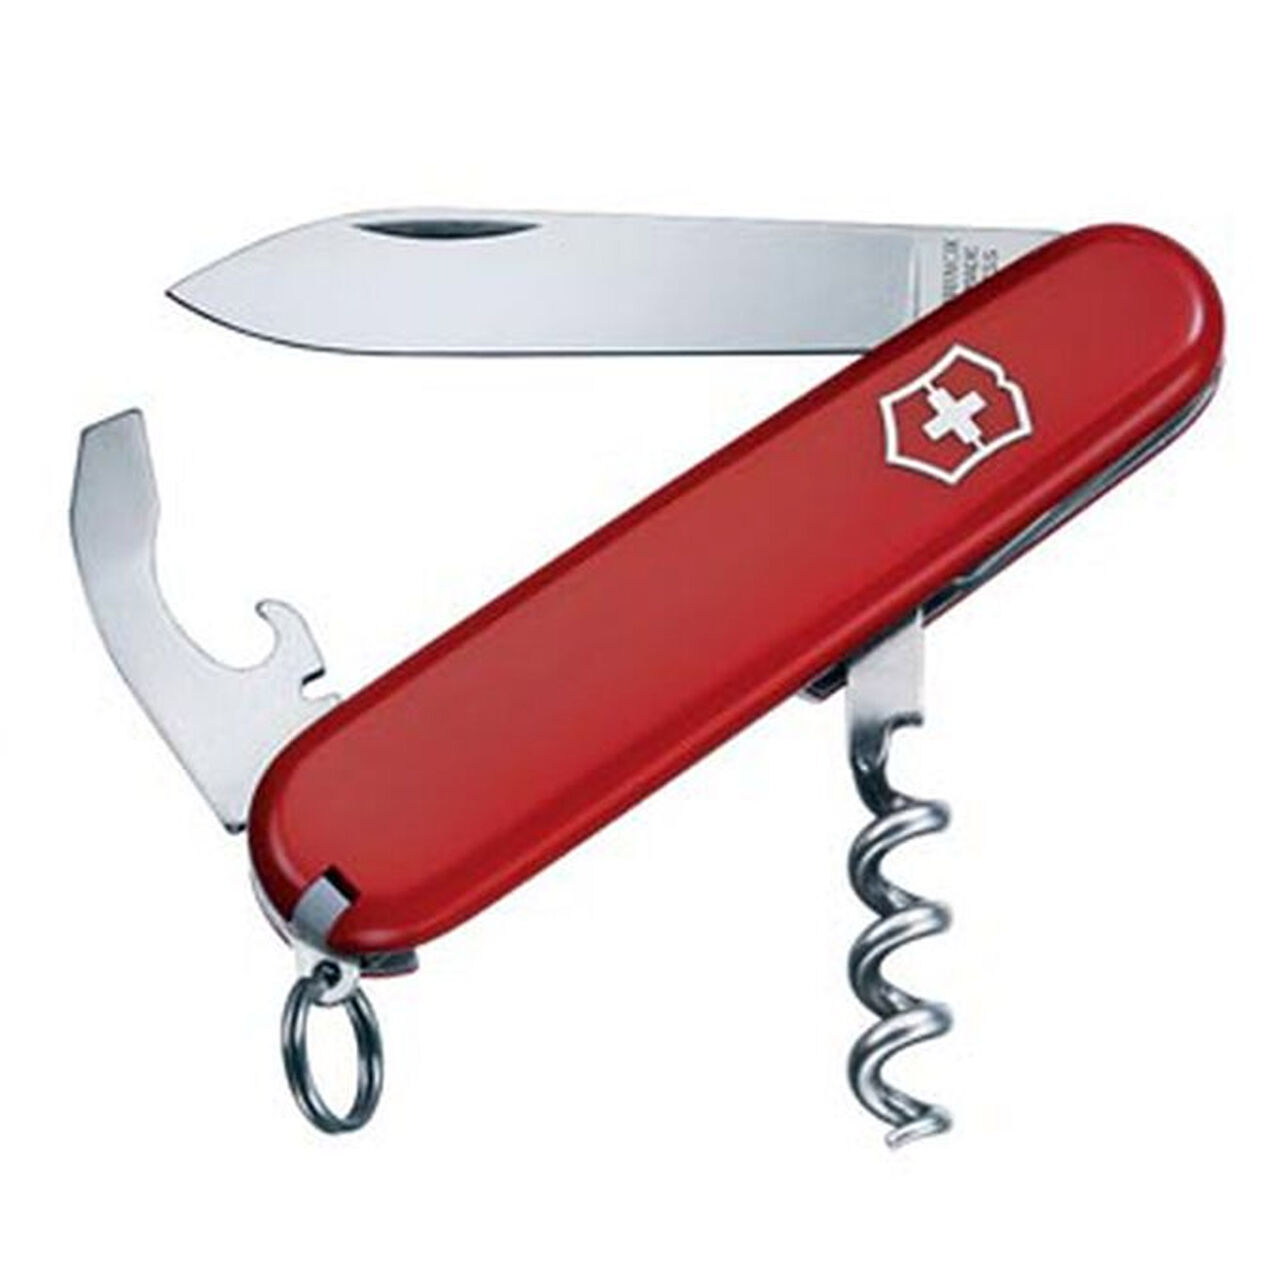 Victorinox Swiss Army Waiter Knife #53891, , large image number 0